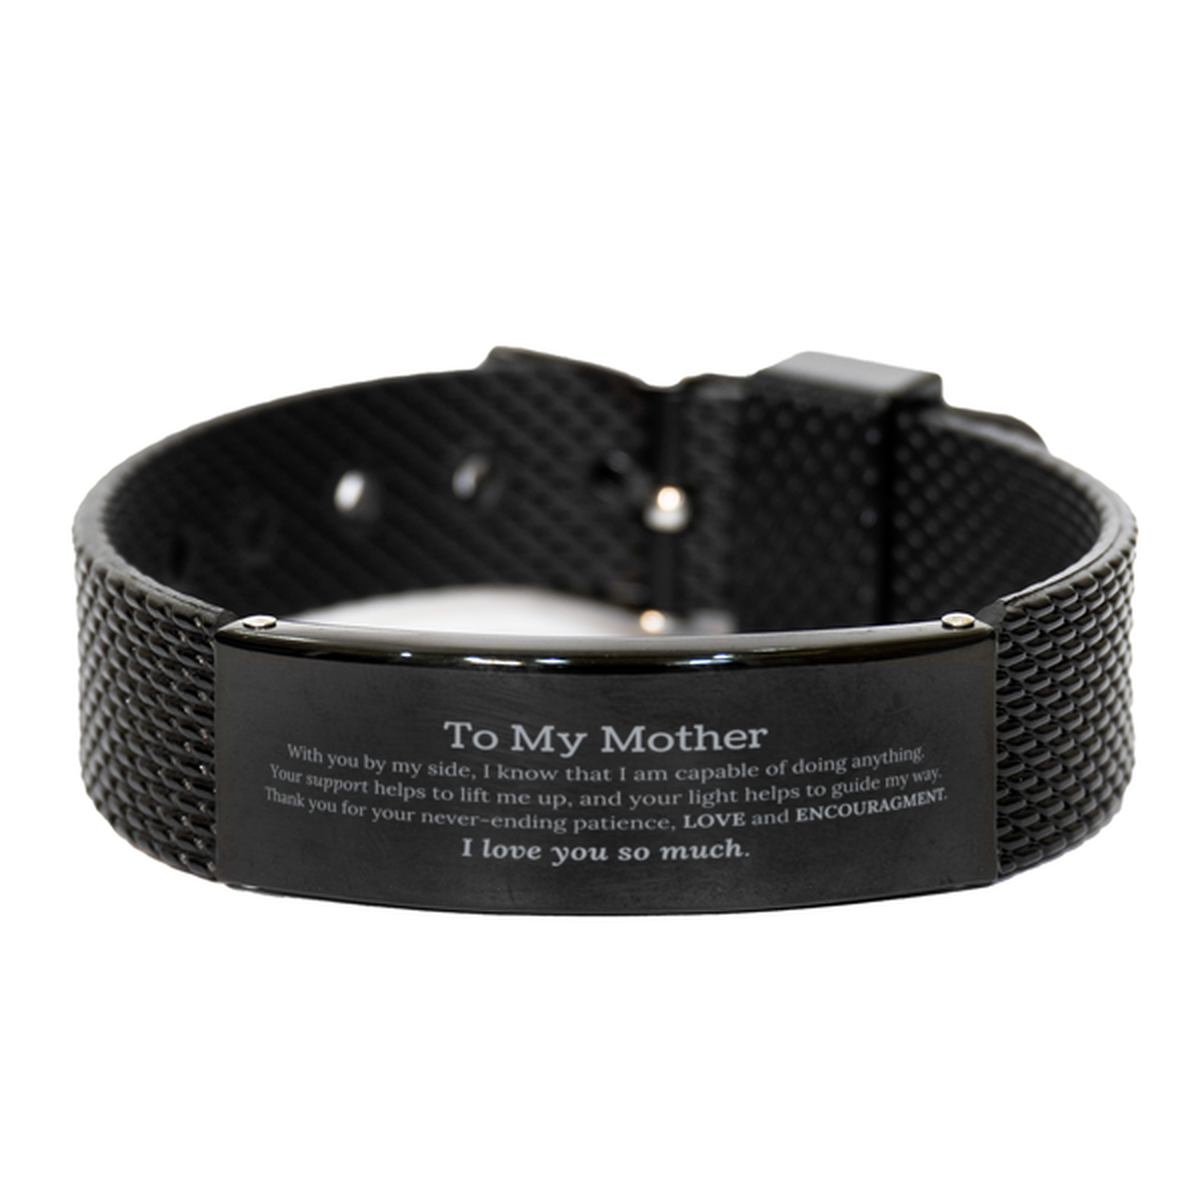 Appreciation Mother Black Shark Mesh Bracelet Gifts, To My Mother Birthday Christmas Wedding Keepsake Gifts for Mother With you by my side, I know that I am capable of doing anything. I love you so much